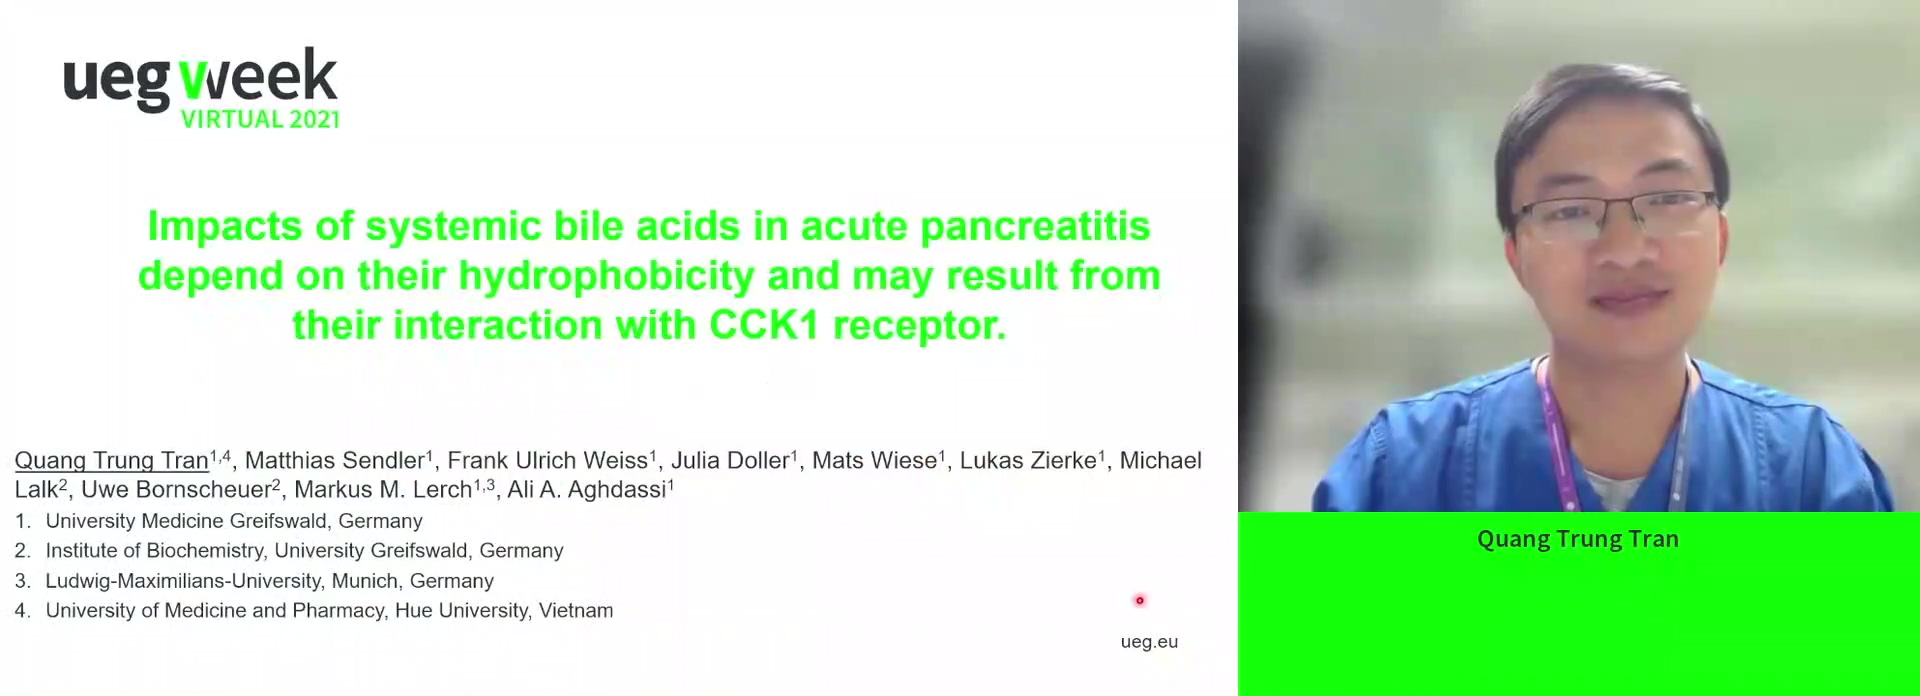 IMPACTS OF SYSTEMIC BILE ACIDS IN ACUTE PANCREATITIS DEPEND ON THEIR HYDROPHOBICITY AND MAY RESULT FROM THEIR INTERACTION WITH CCK1 RECEPTOR